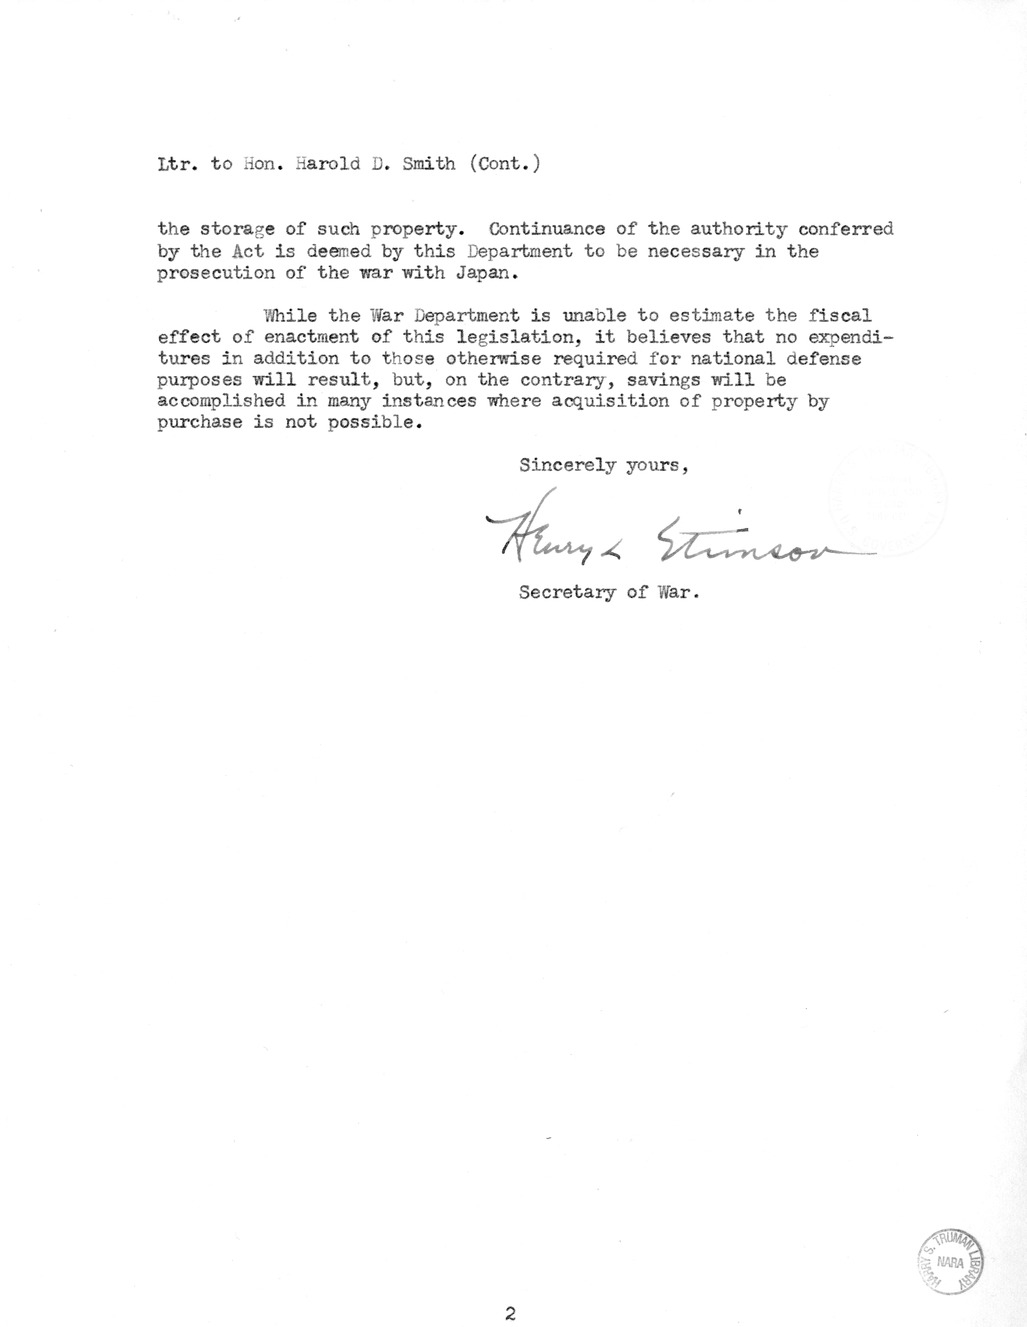 Memorandum from Harold D. Smith to M. C. Latta, H. R. 3232, to Amend an Act to Authorize the President to Requisition Certain Articles and Materials for the Use of the United States, With Attachments